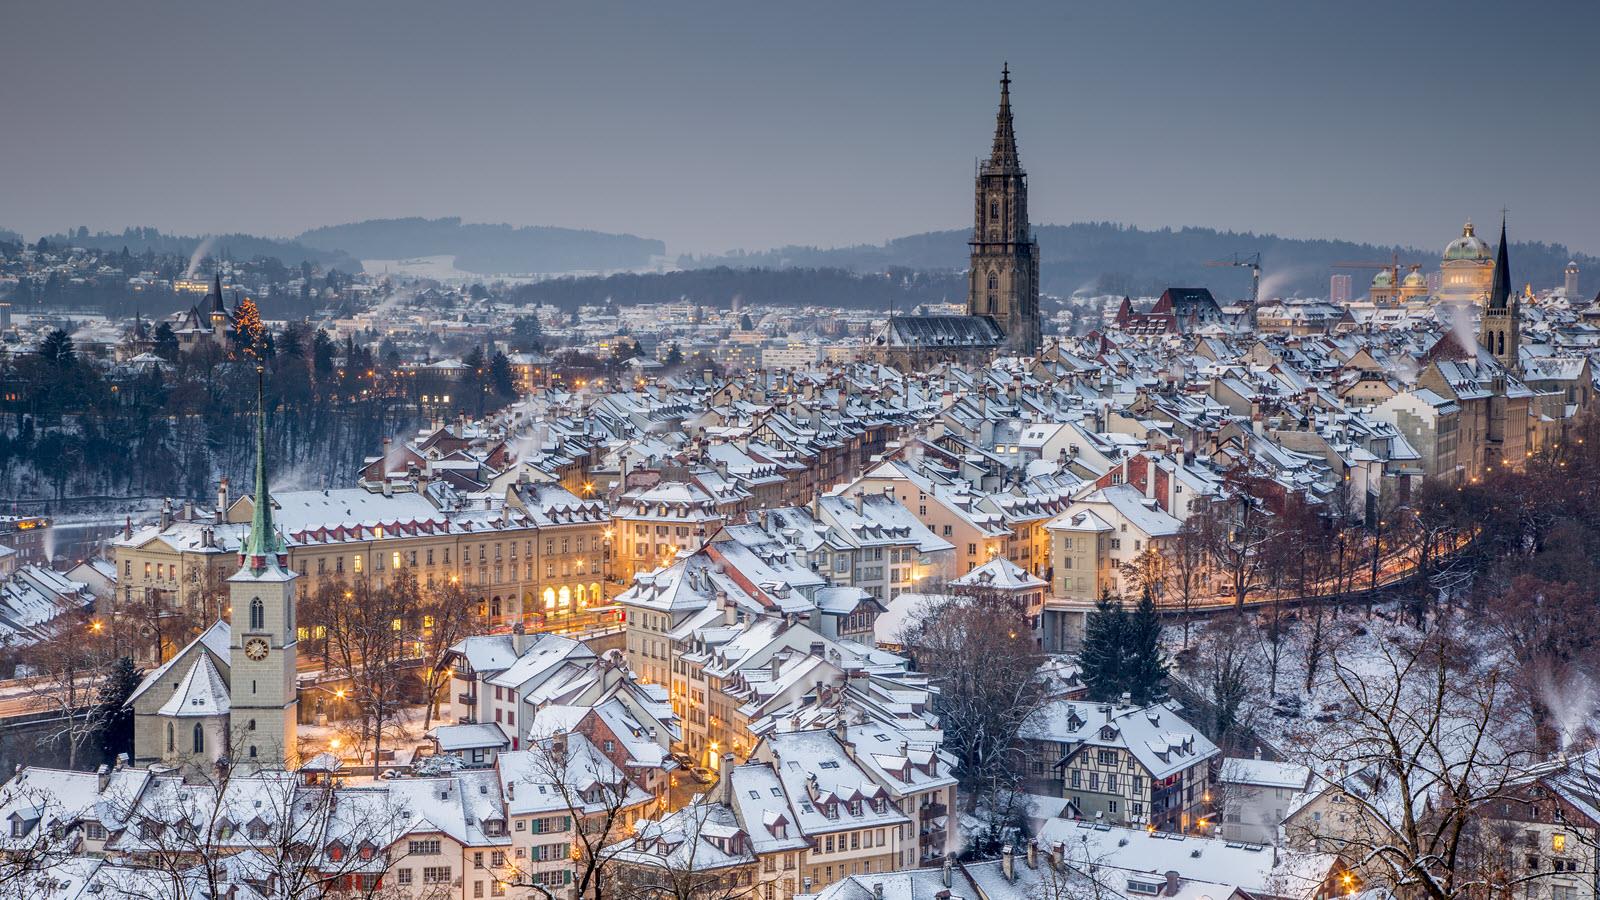 The snow-dusted Swiss capital city of Bern with the tower of its cathedral against the horizon